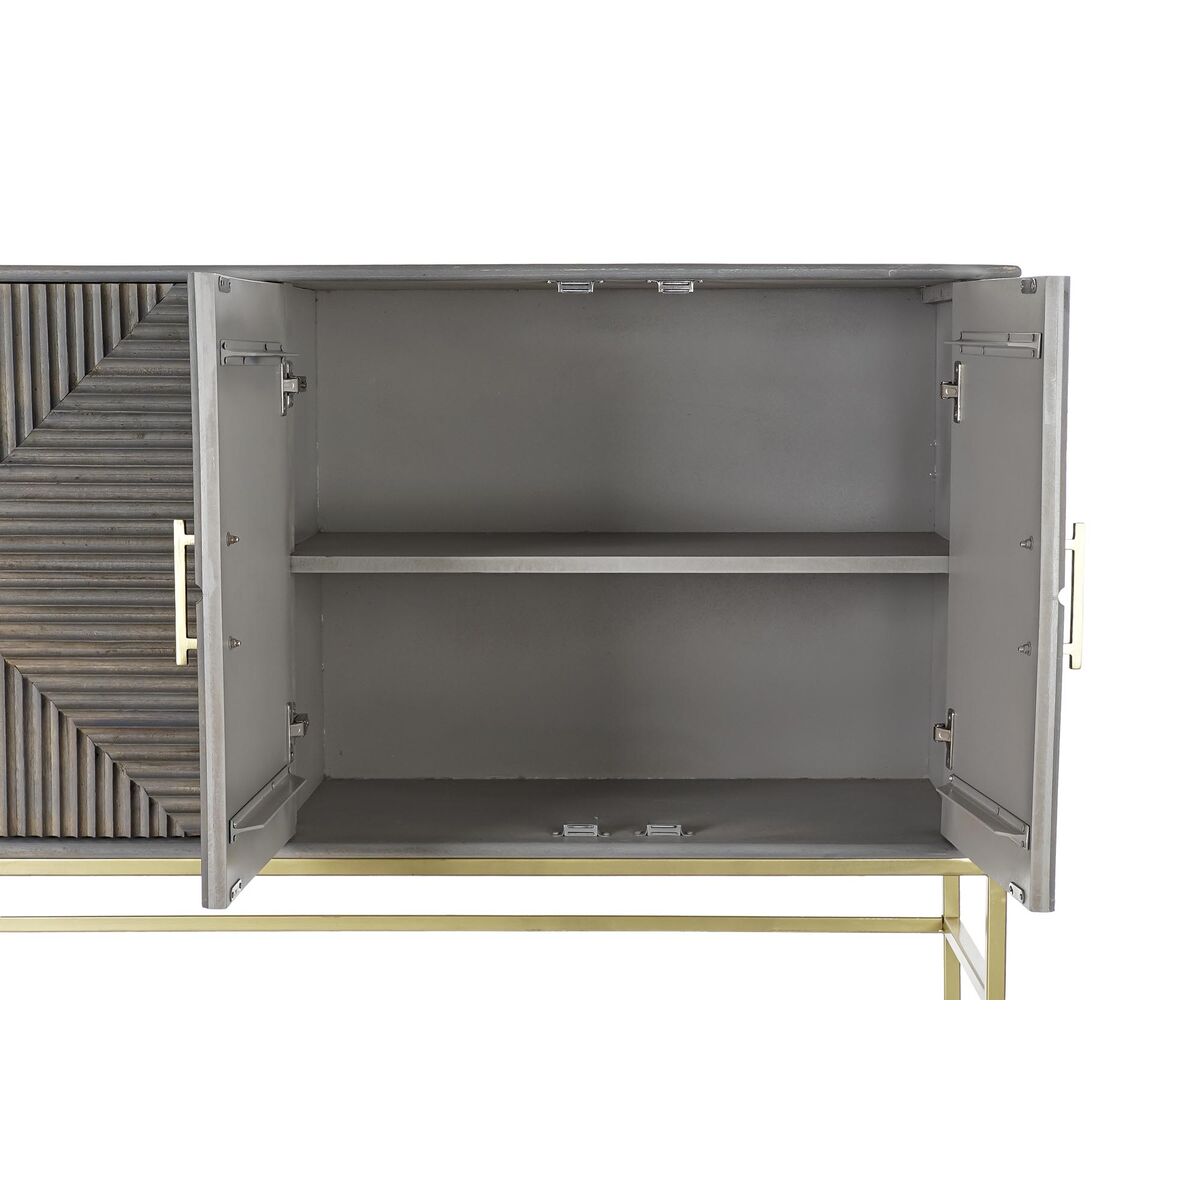 Sideboard in Gray Wood and Golden Brass Home Decor (152 x 42 x 91 cm)